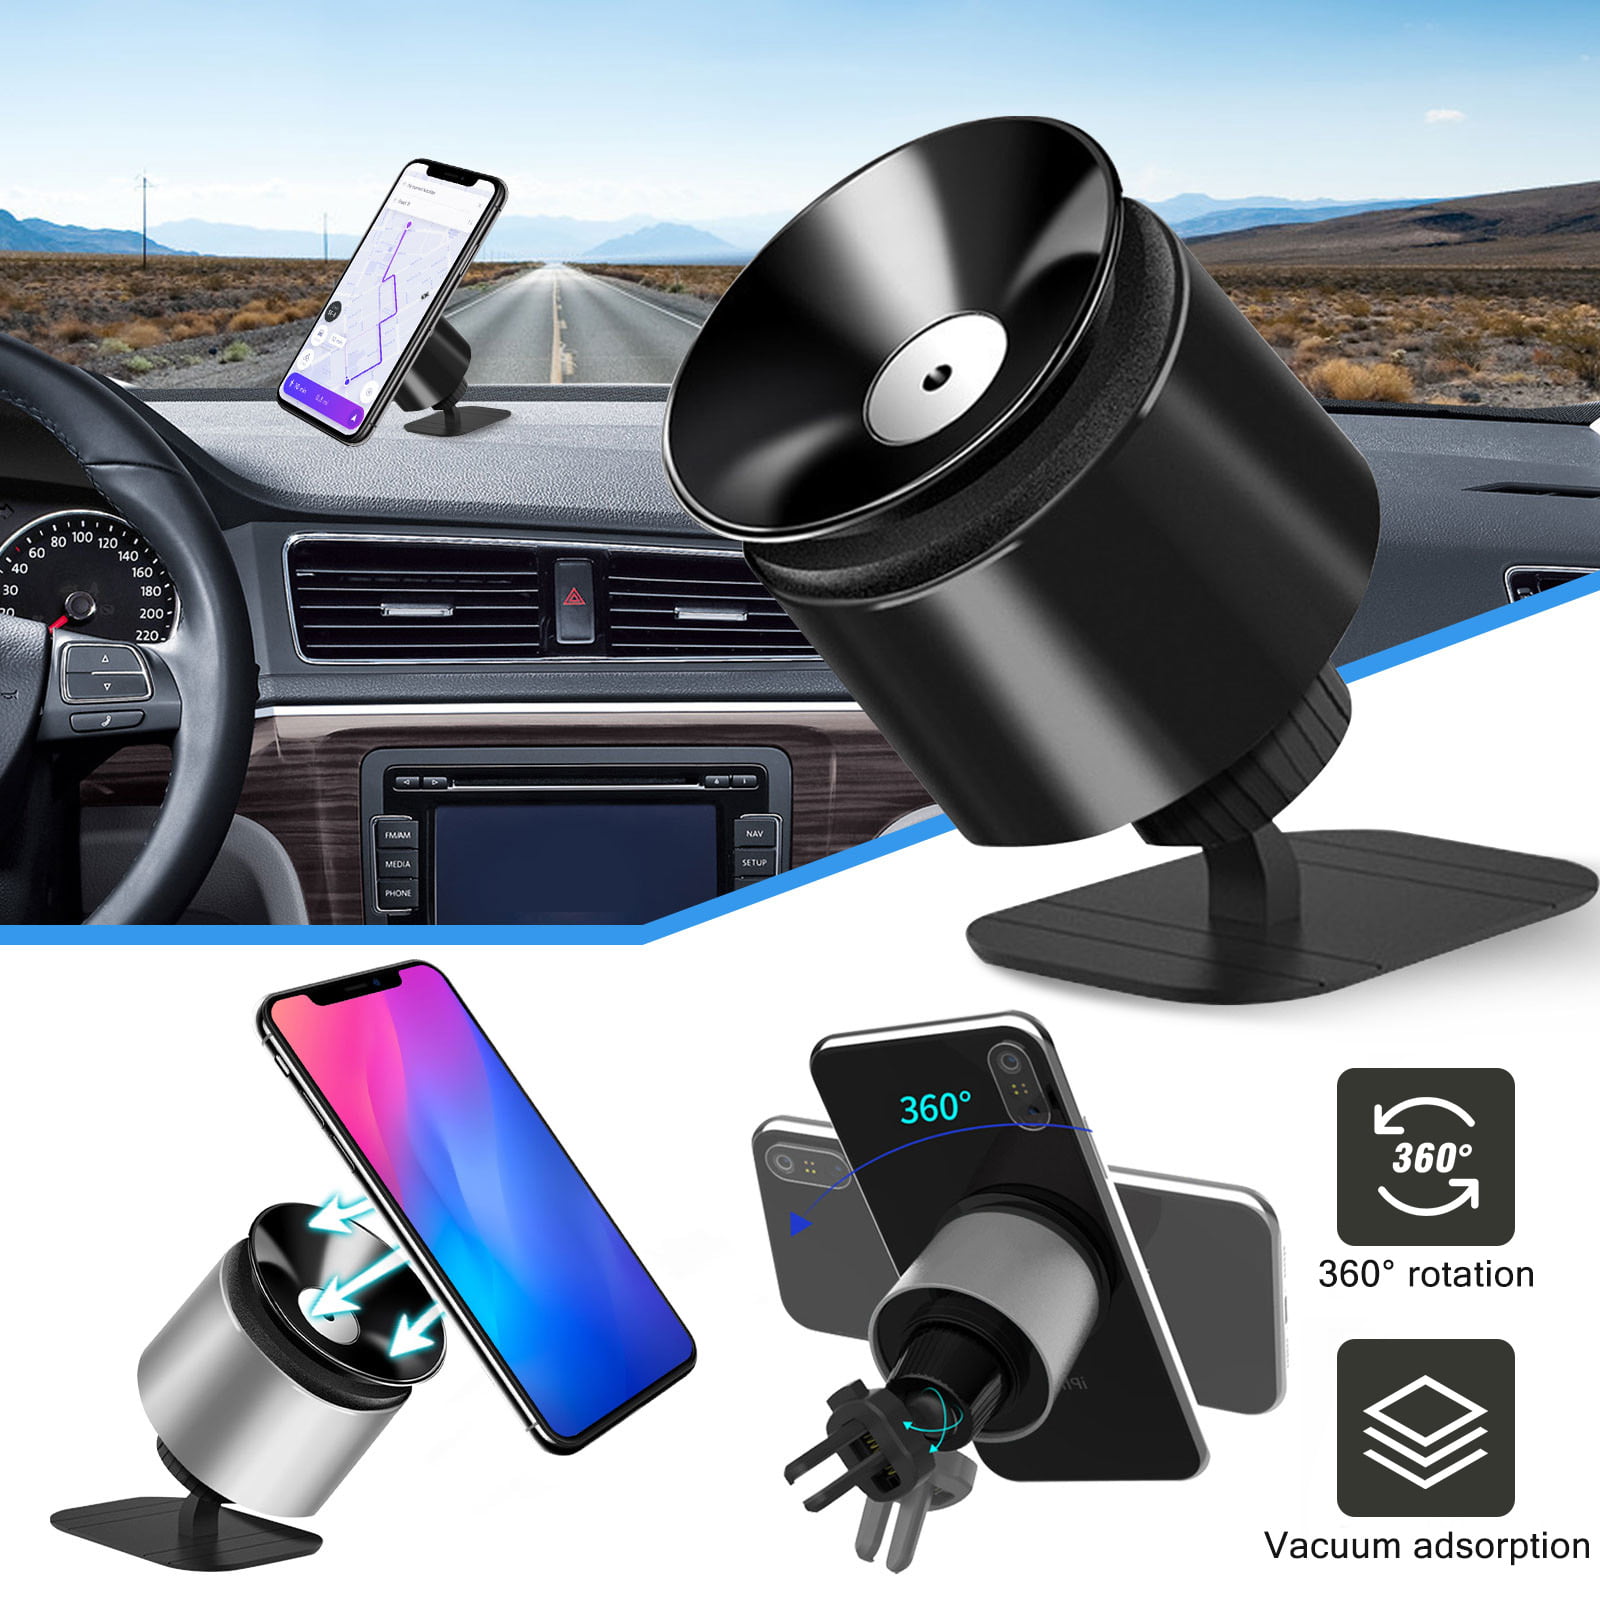 Car Auto Bracket Black Air Vent Mount Holder Cradle Stand Kit For iPhone 5 6 GPS